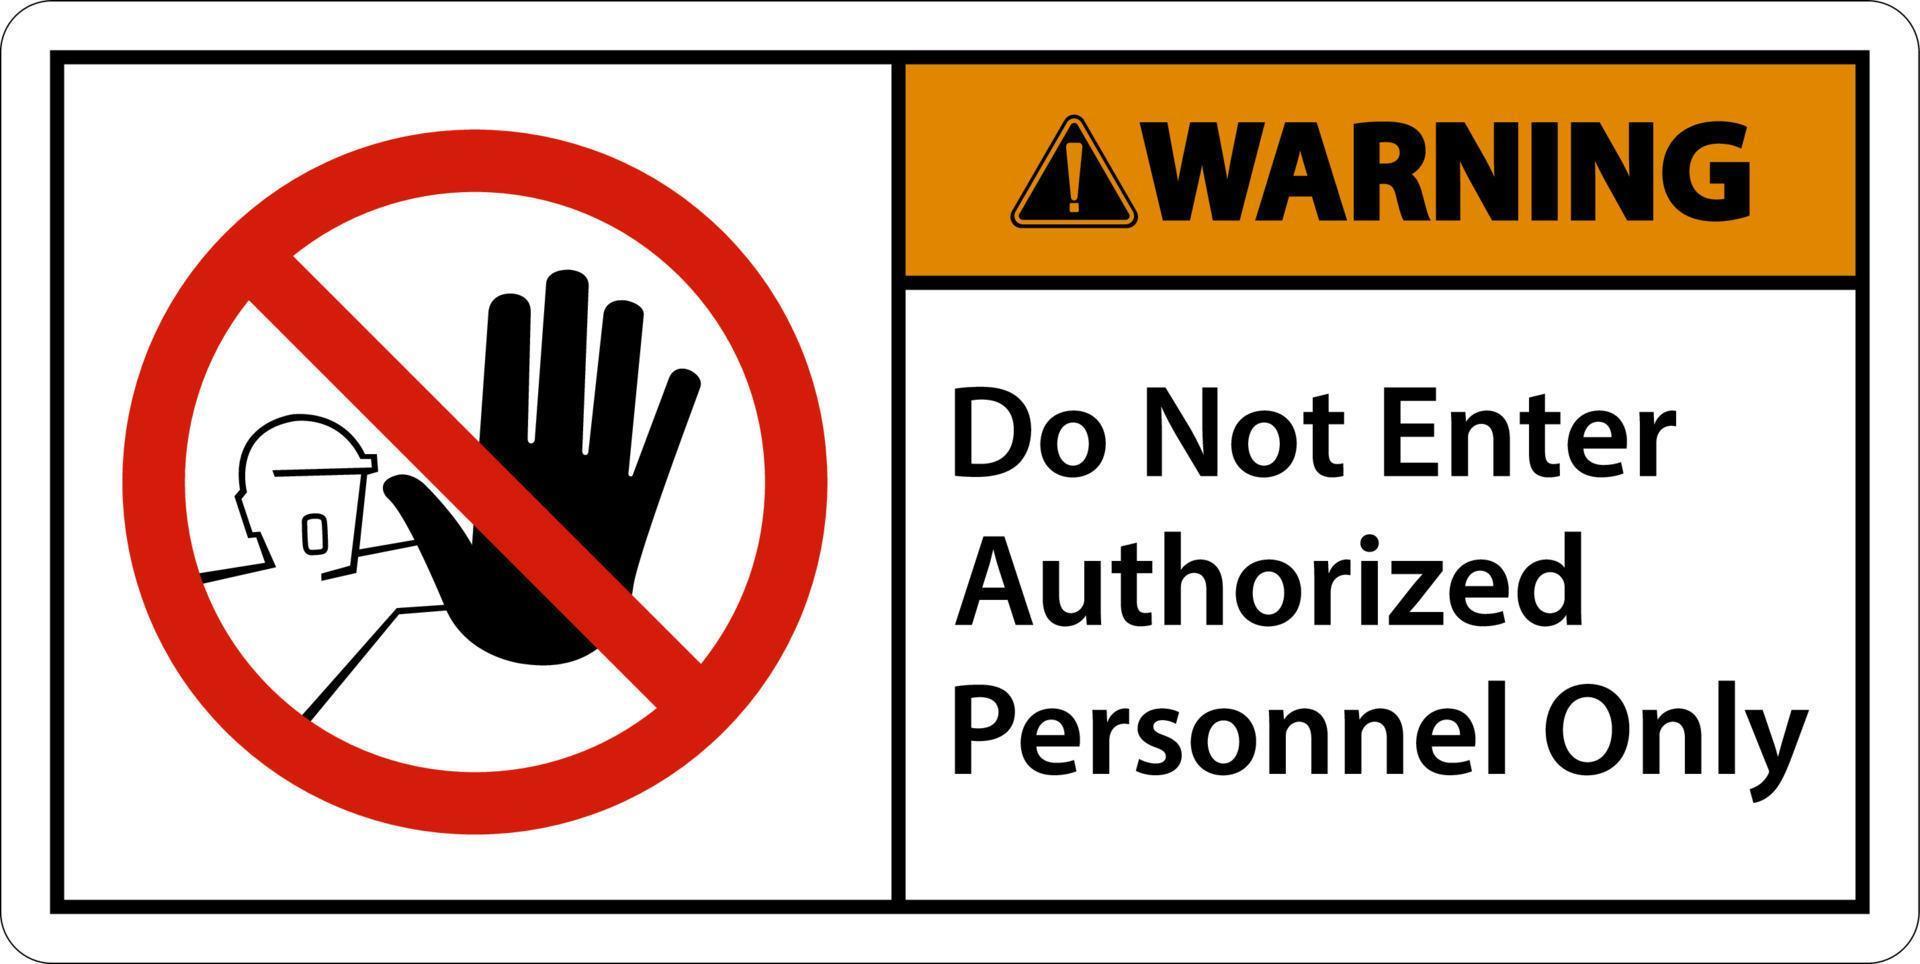 Warning Do Not Enter Authorized Personnel Only Sign vector